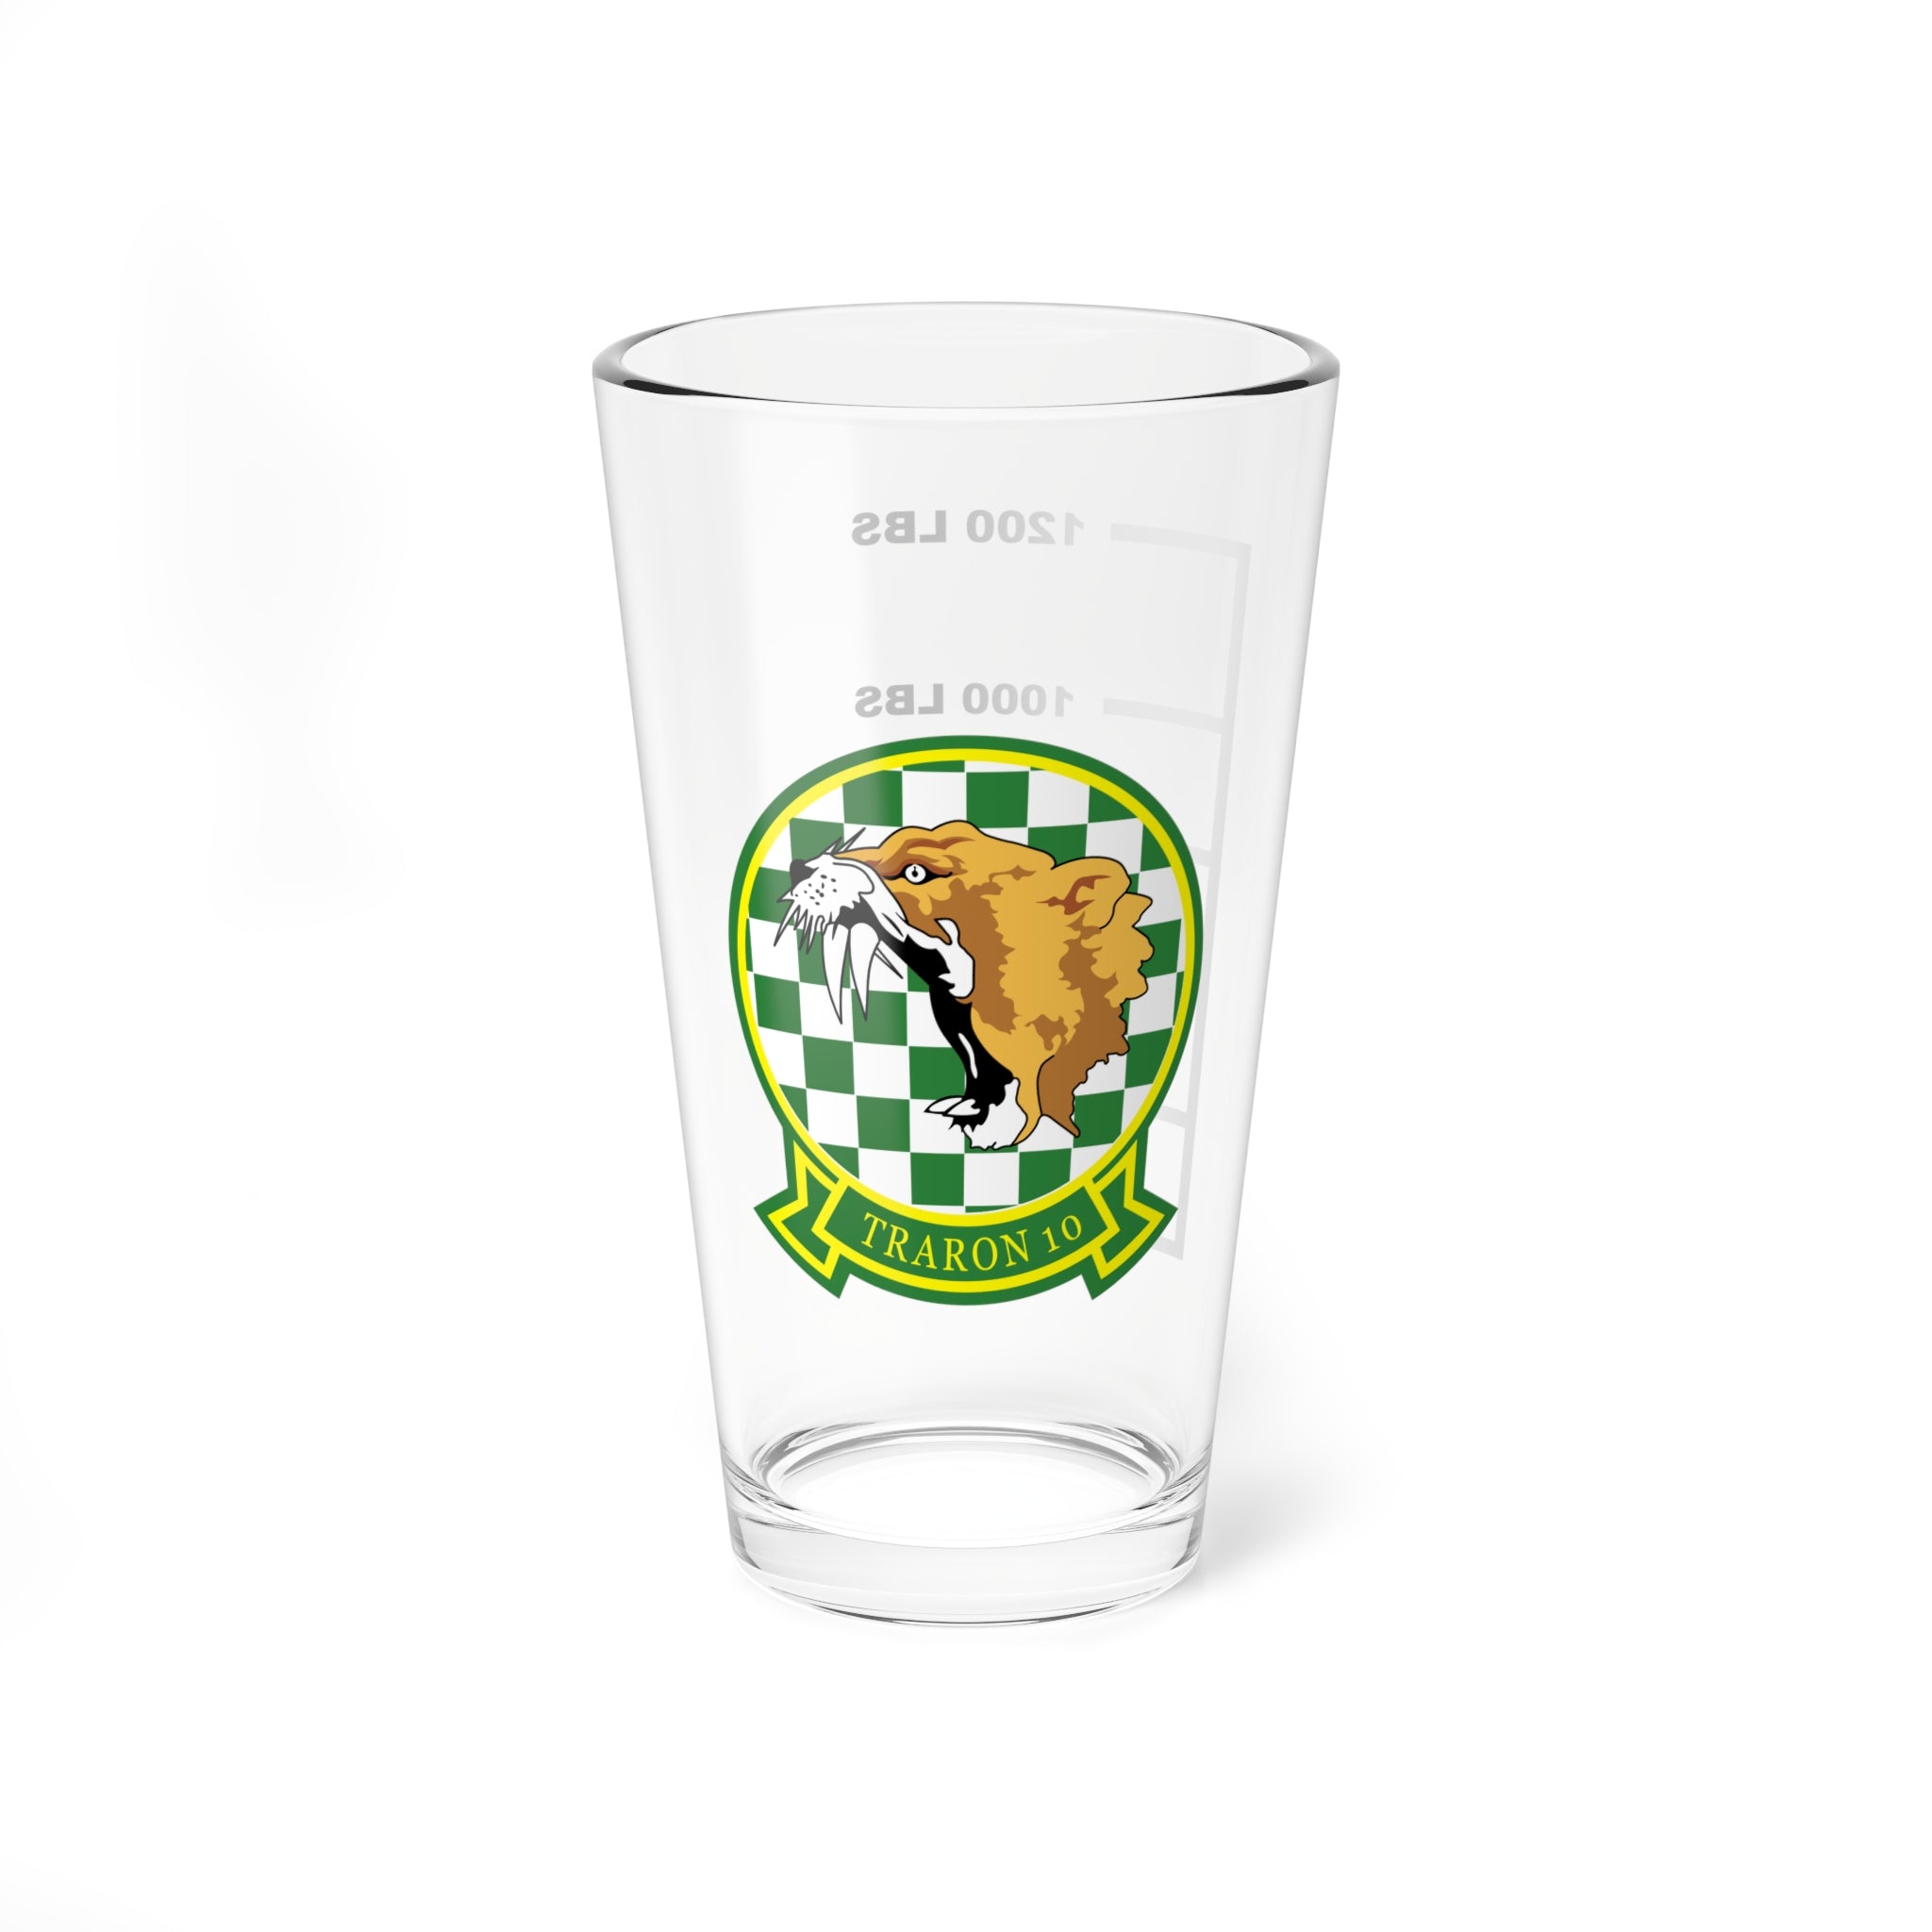 VT-10 "Wildcats" Fuel Low Pint Glass, 16oz, Navy Naval Flight Officer Training Squadron flying the T-6 Texan II